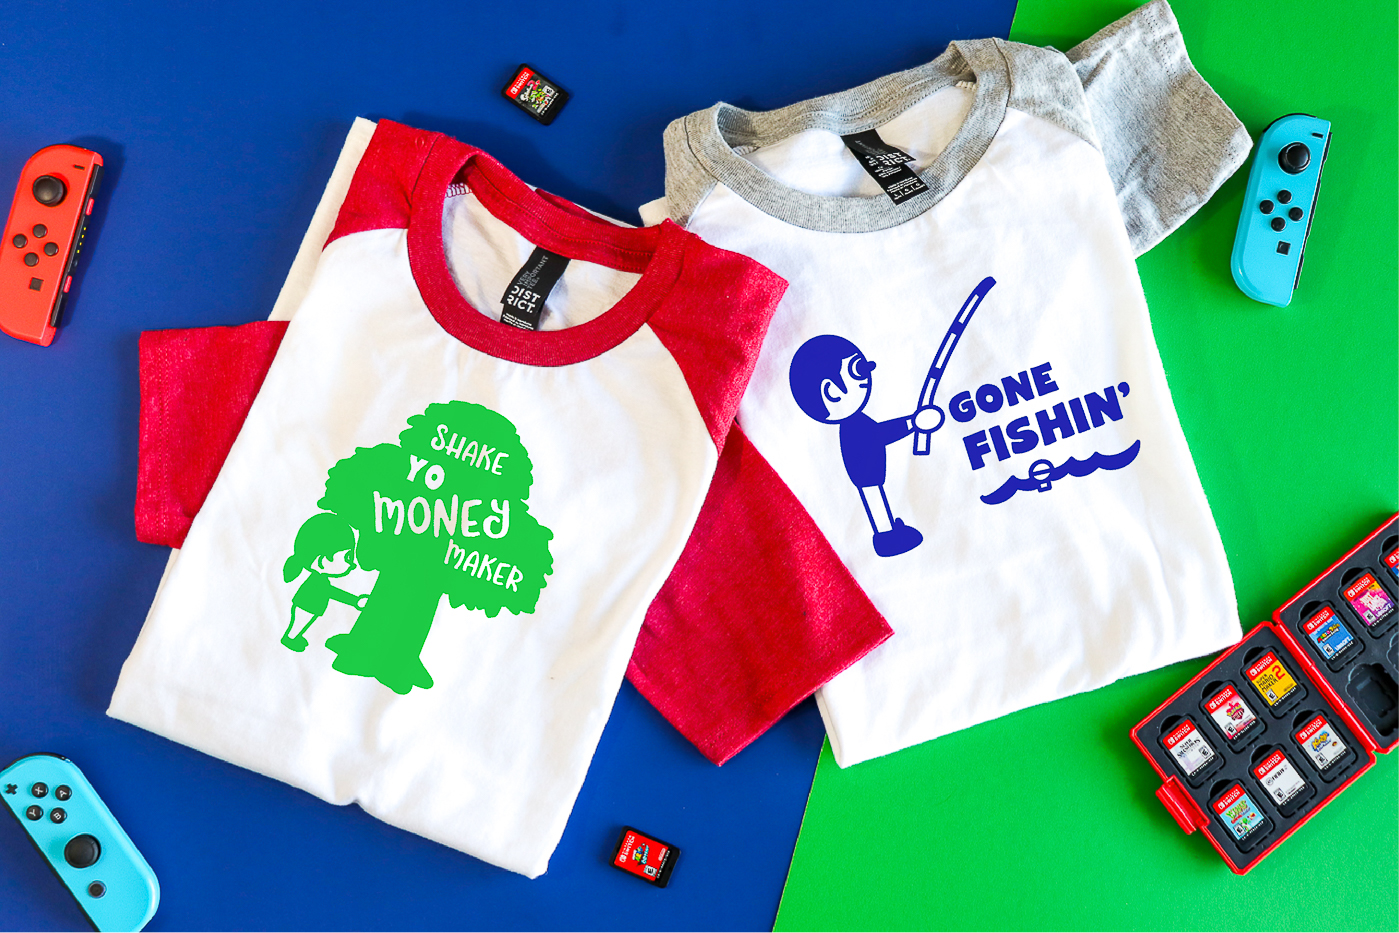 pictured tshirts with vinyl animal crossing images and nintendo switch controllers and video games